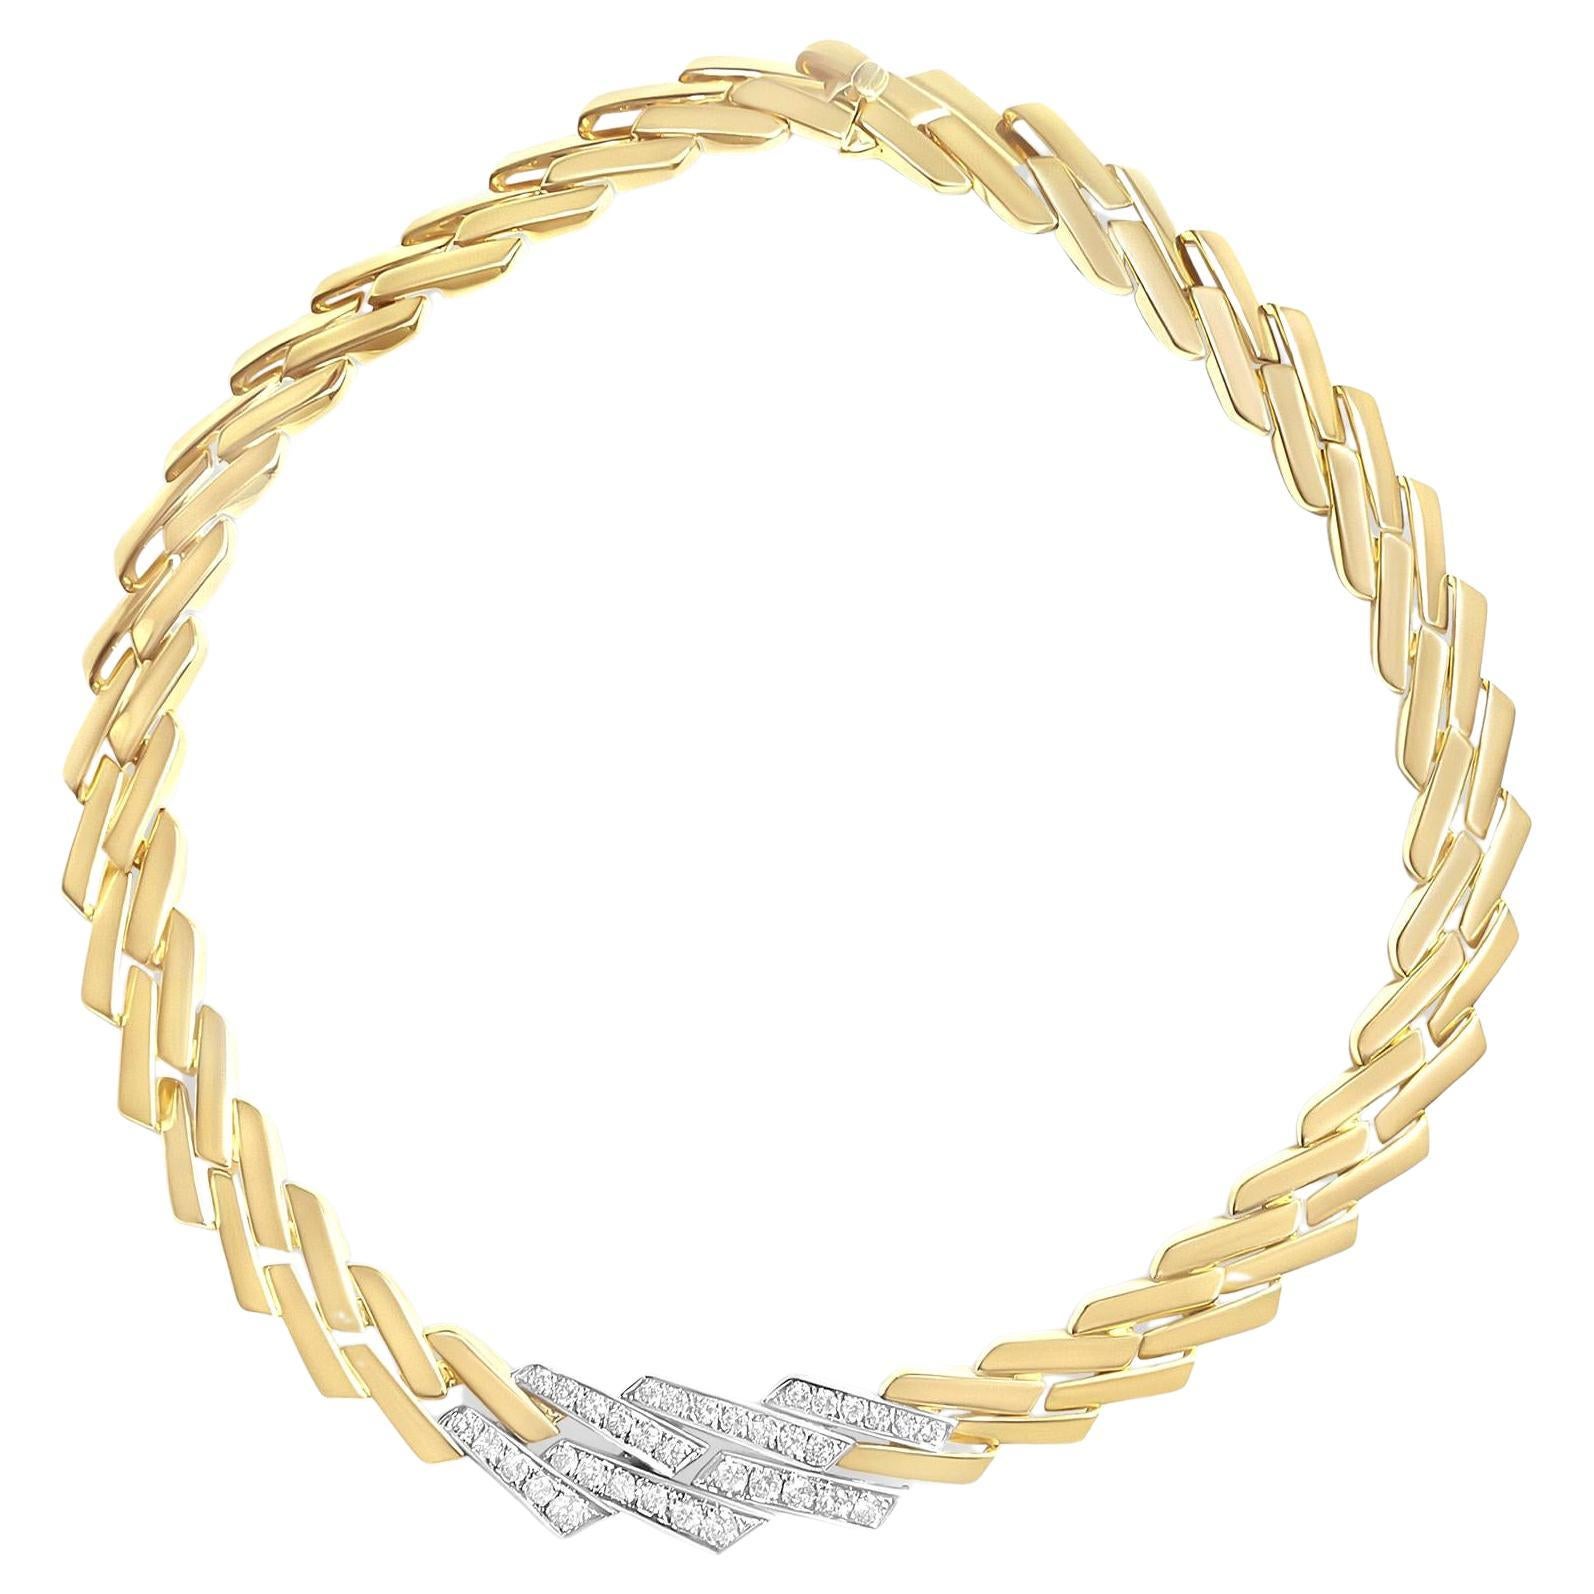 Cuban Curb Link Chain Necklace With Diamonds 2.75 Carats 14K Yellow Gold For Sale